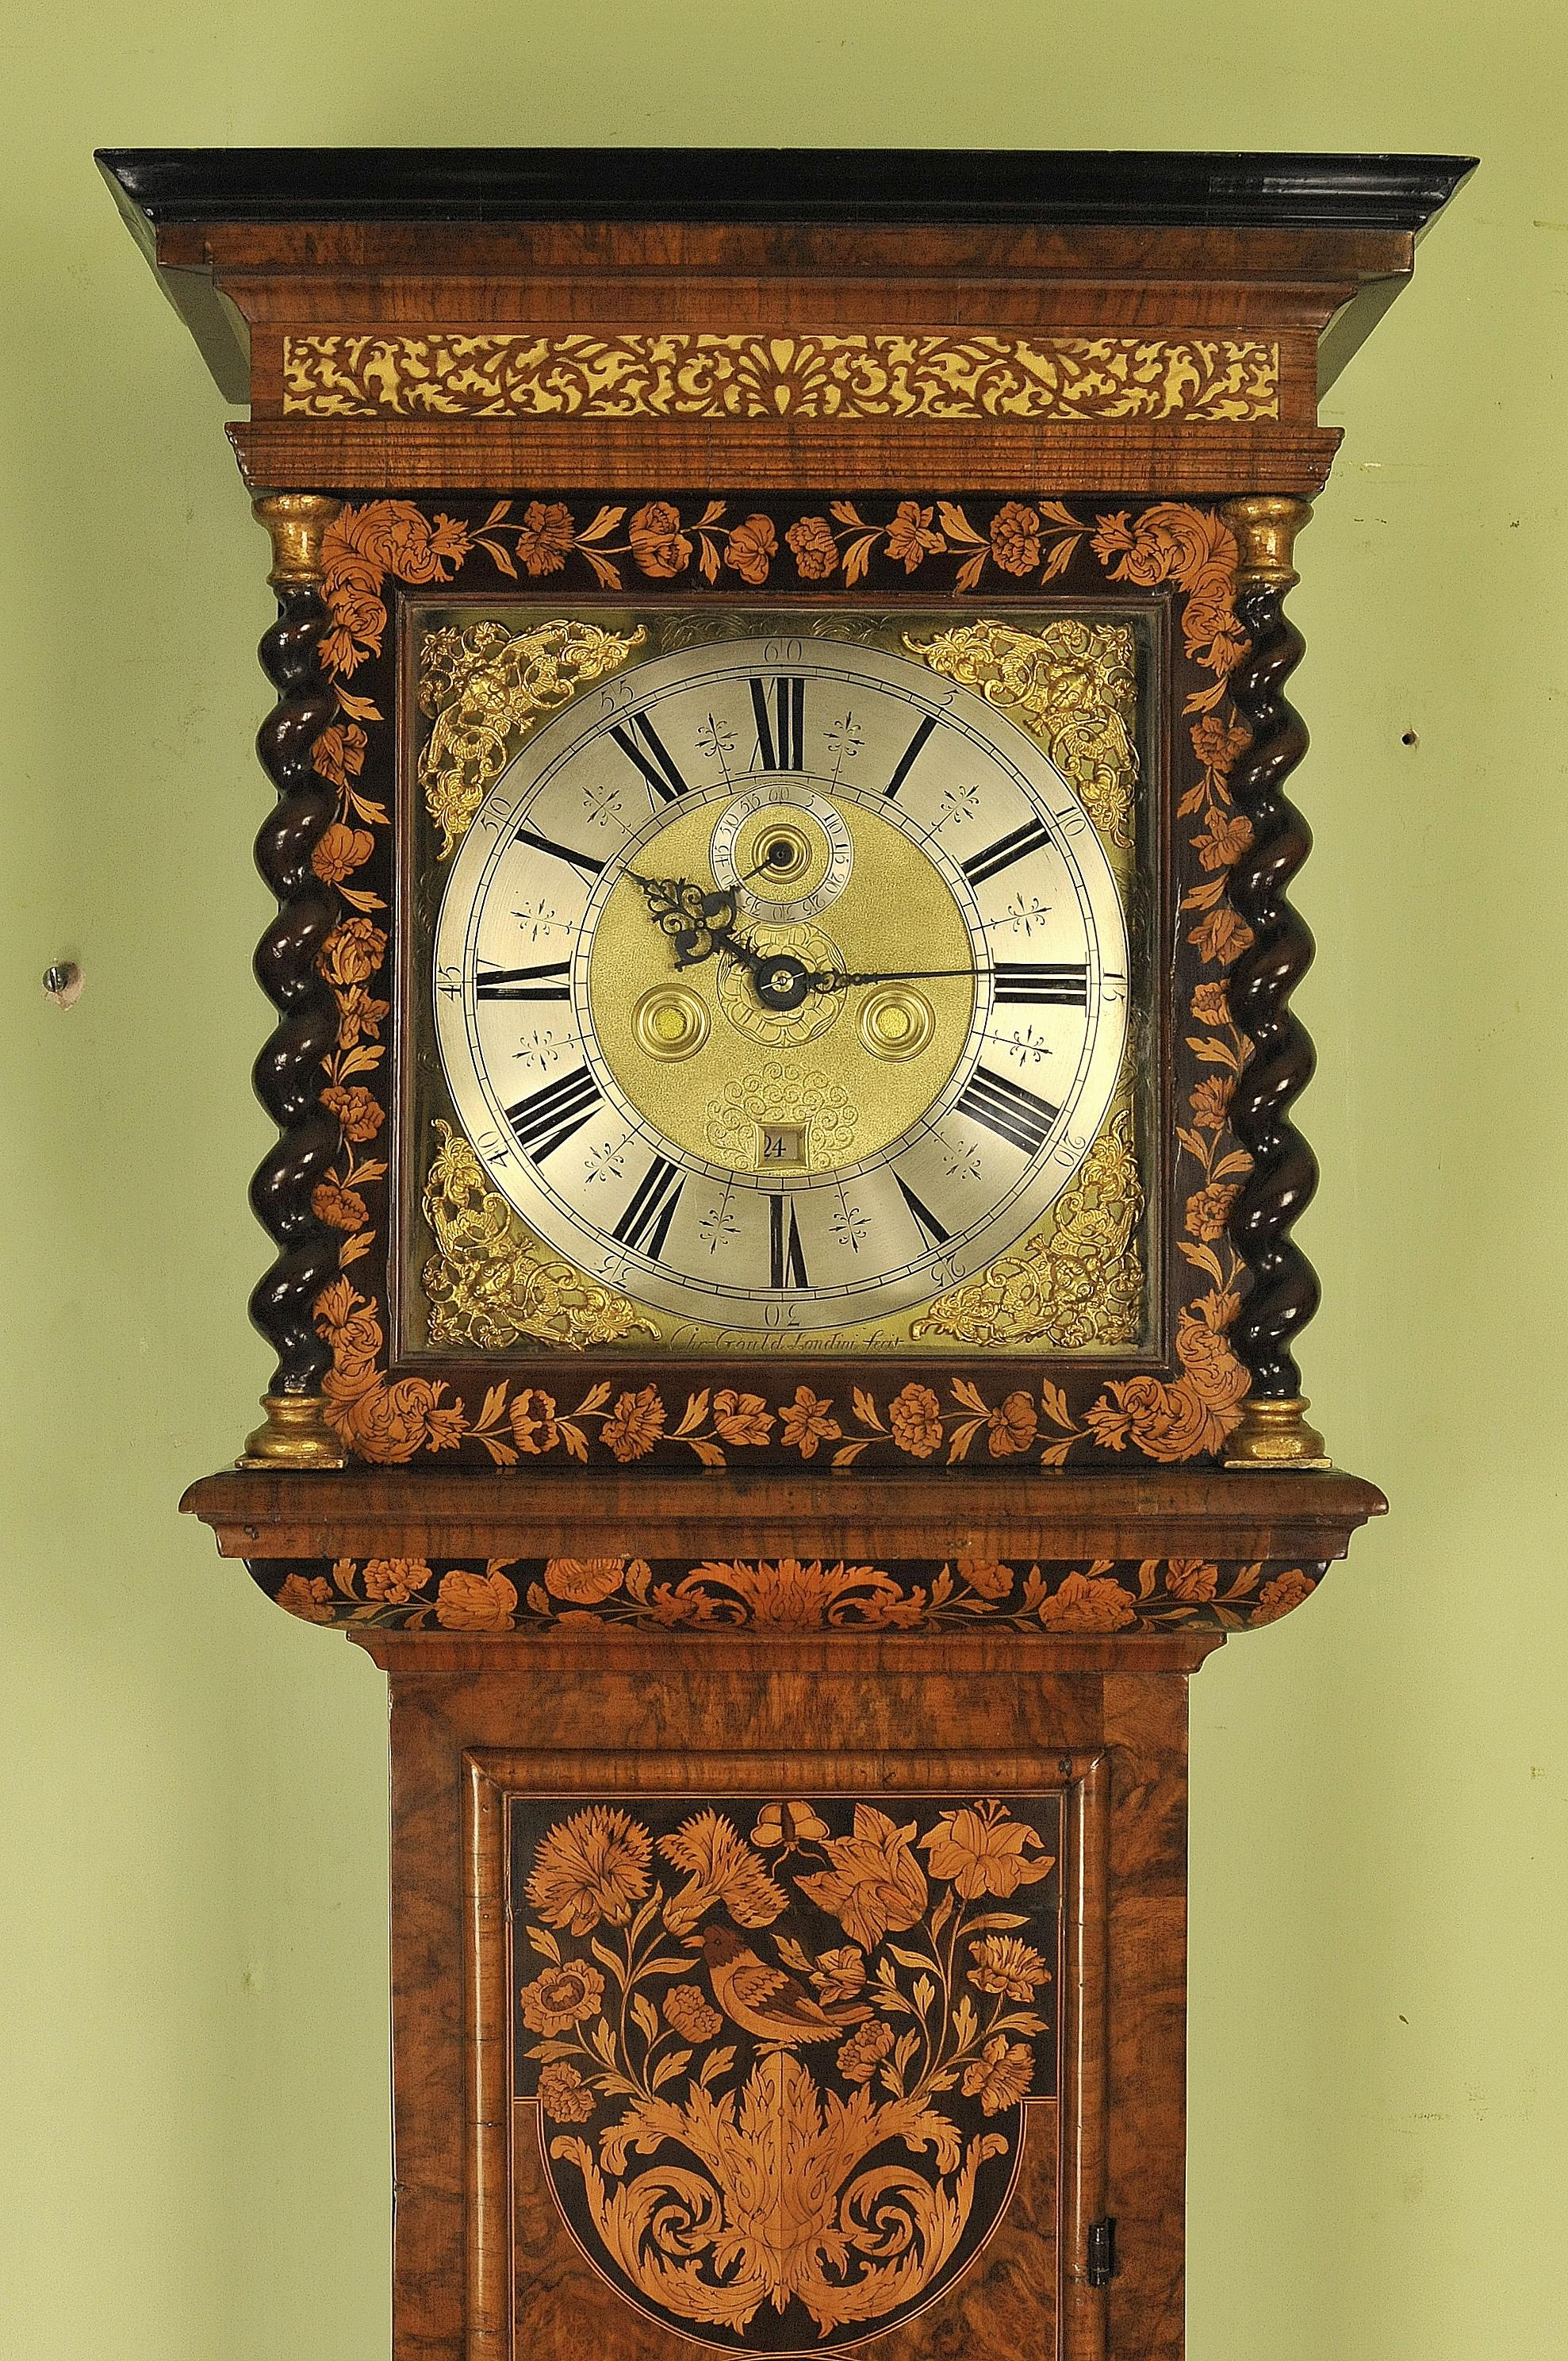 This is an opportunity to acquire an exceptional marquetry clock by the most eminent of English makers Christopher Gould who was made a Free Brother in the Clockmakers' Company in 1682. In 1697 he signed the Clockmakers' Company oath of allegiance.